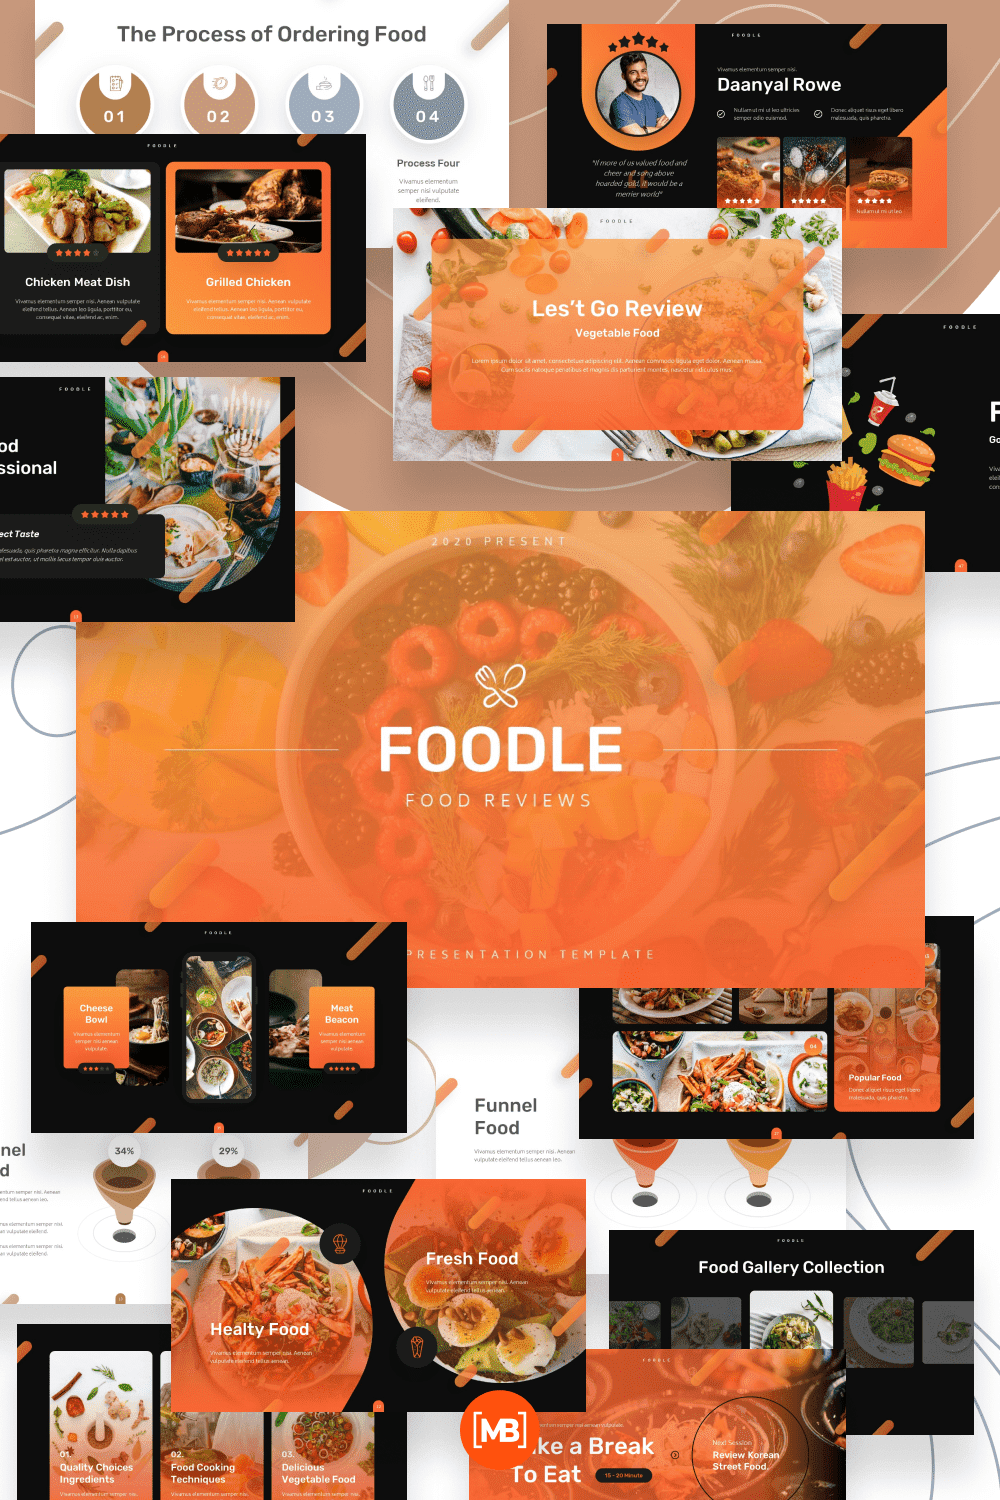 Foodle food review PowerPoint template.